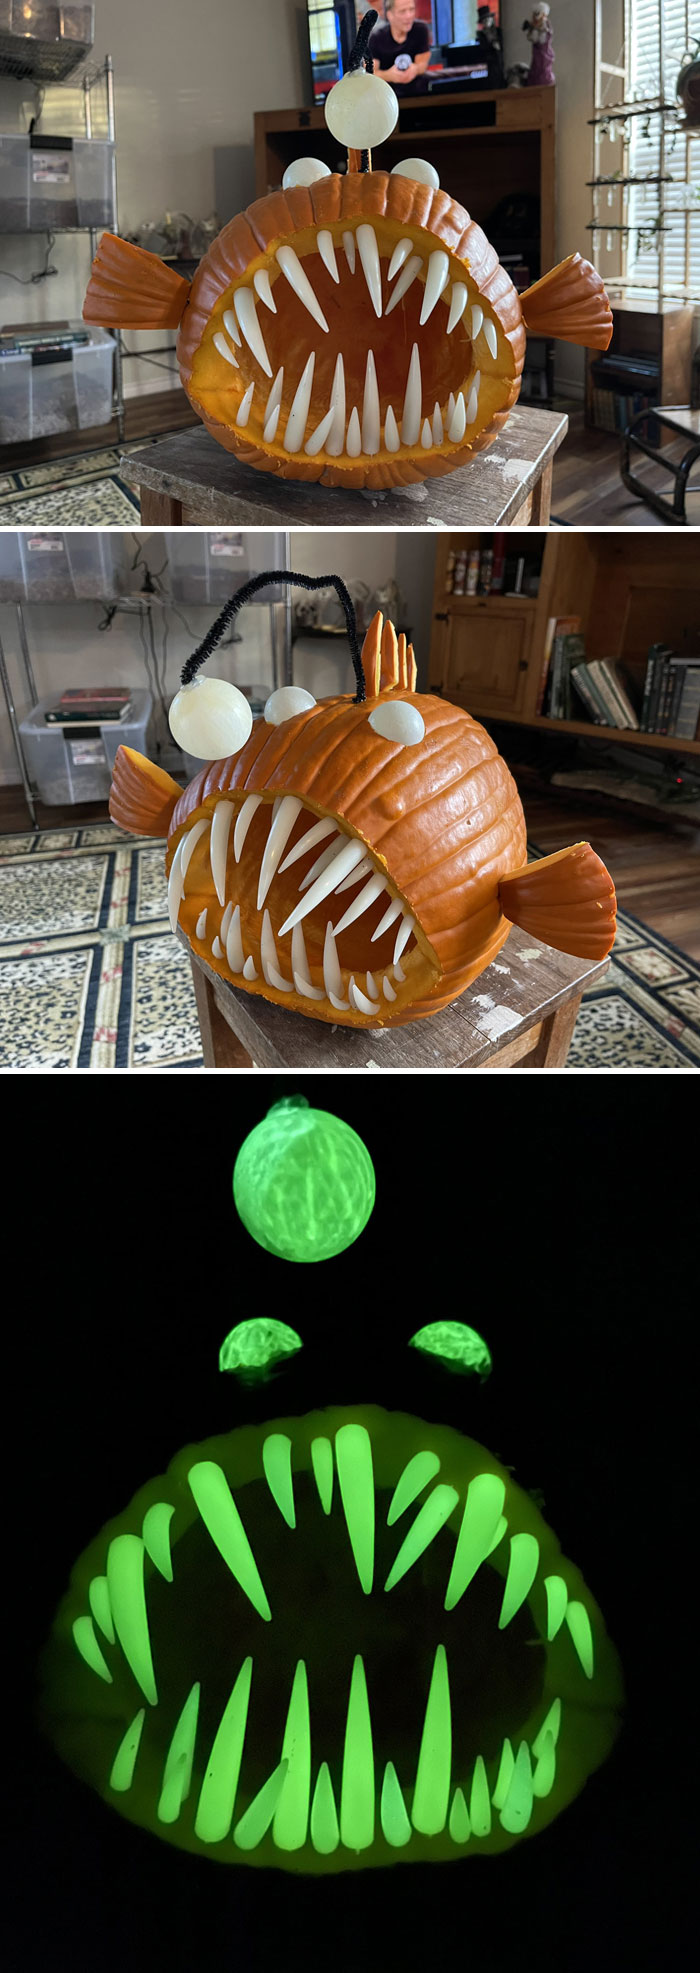 This Year’s Pumpkin Worked Out